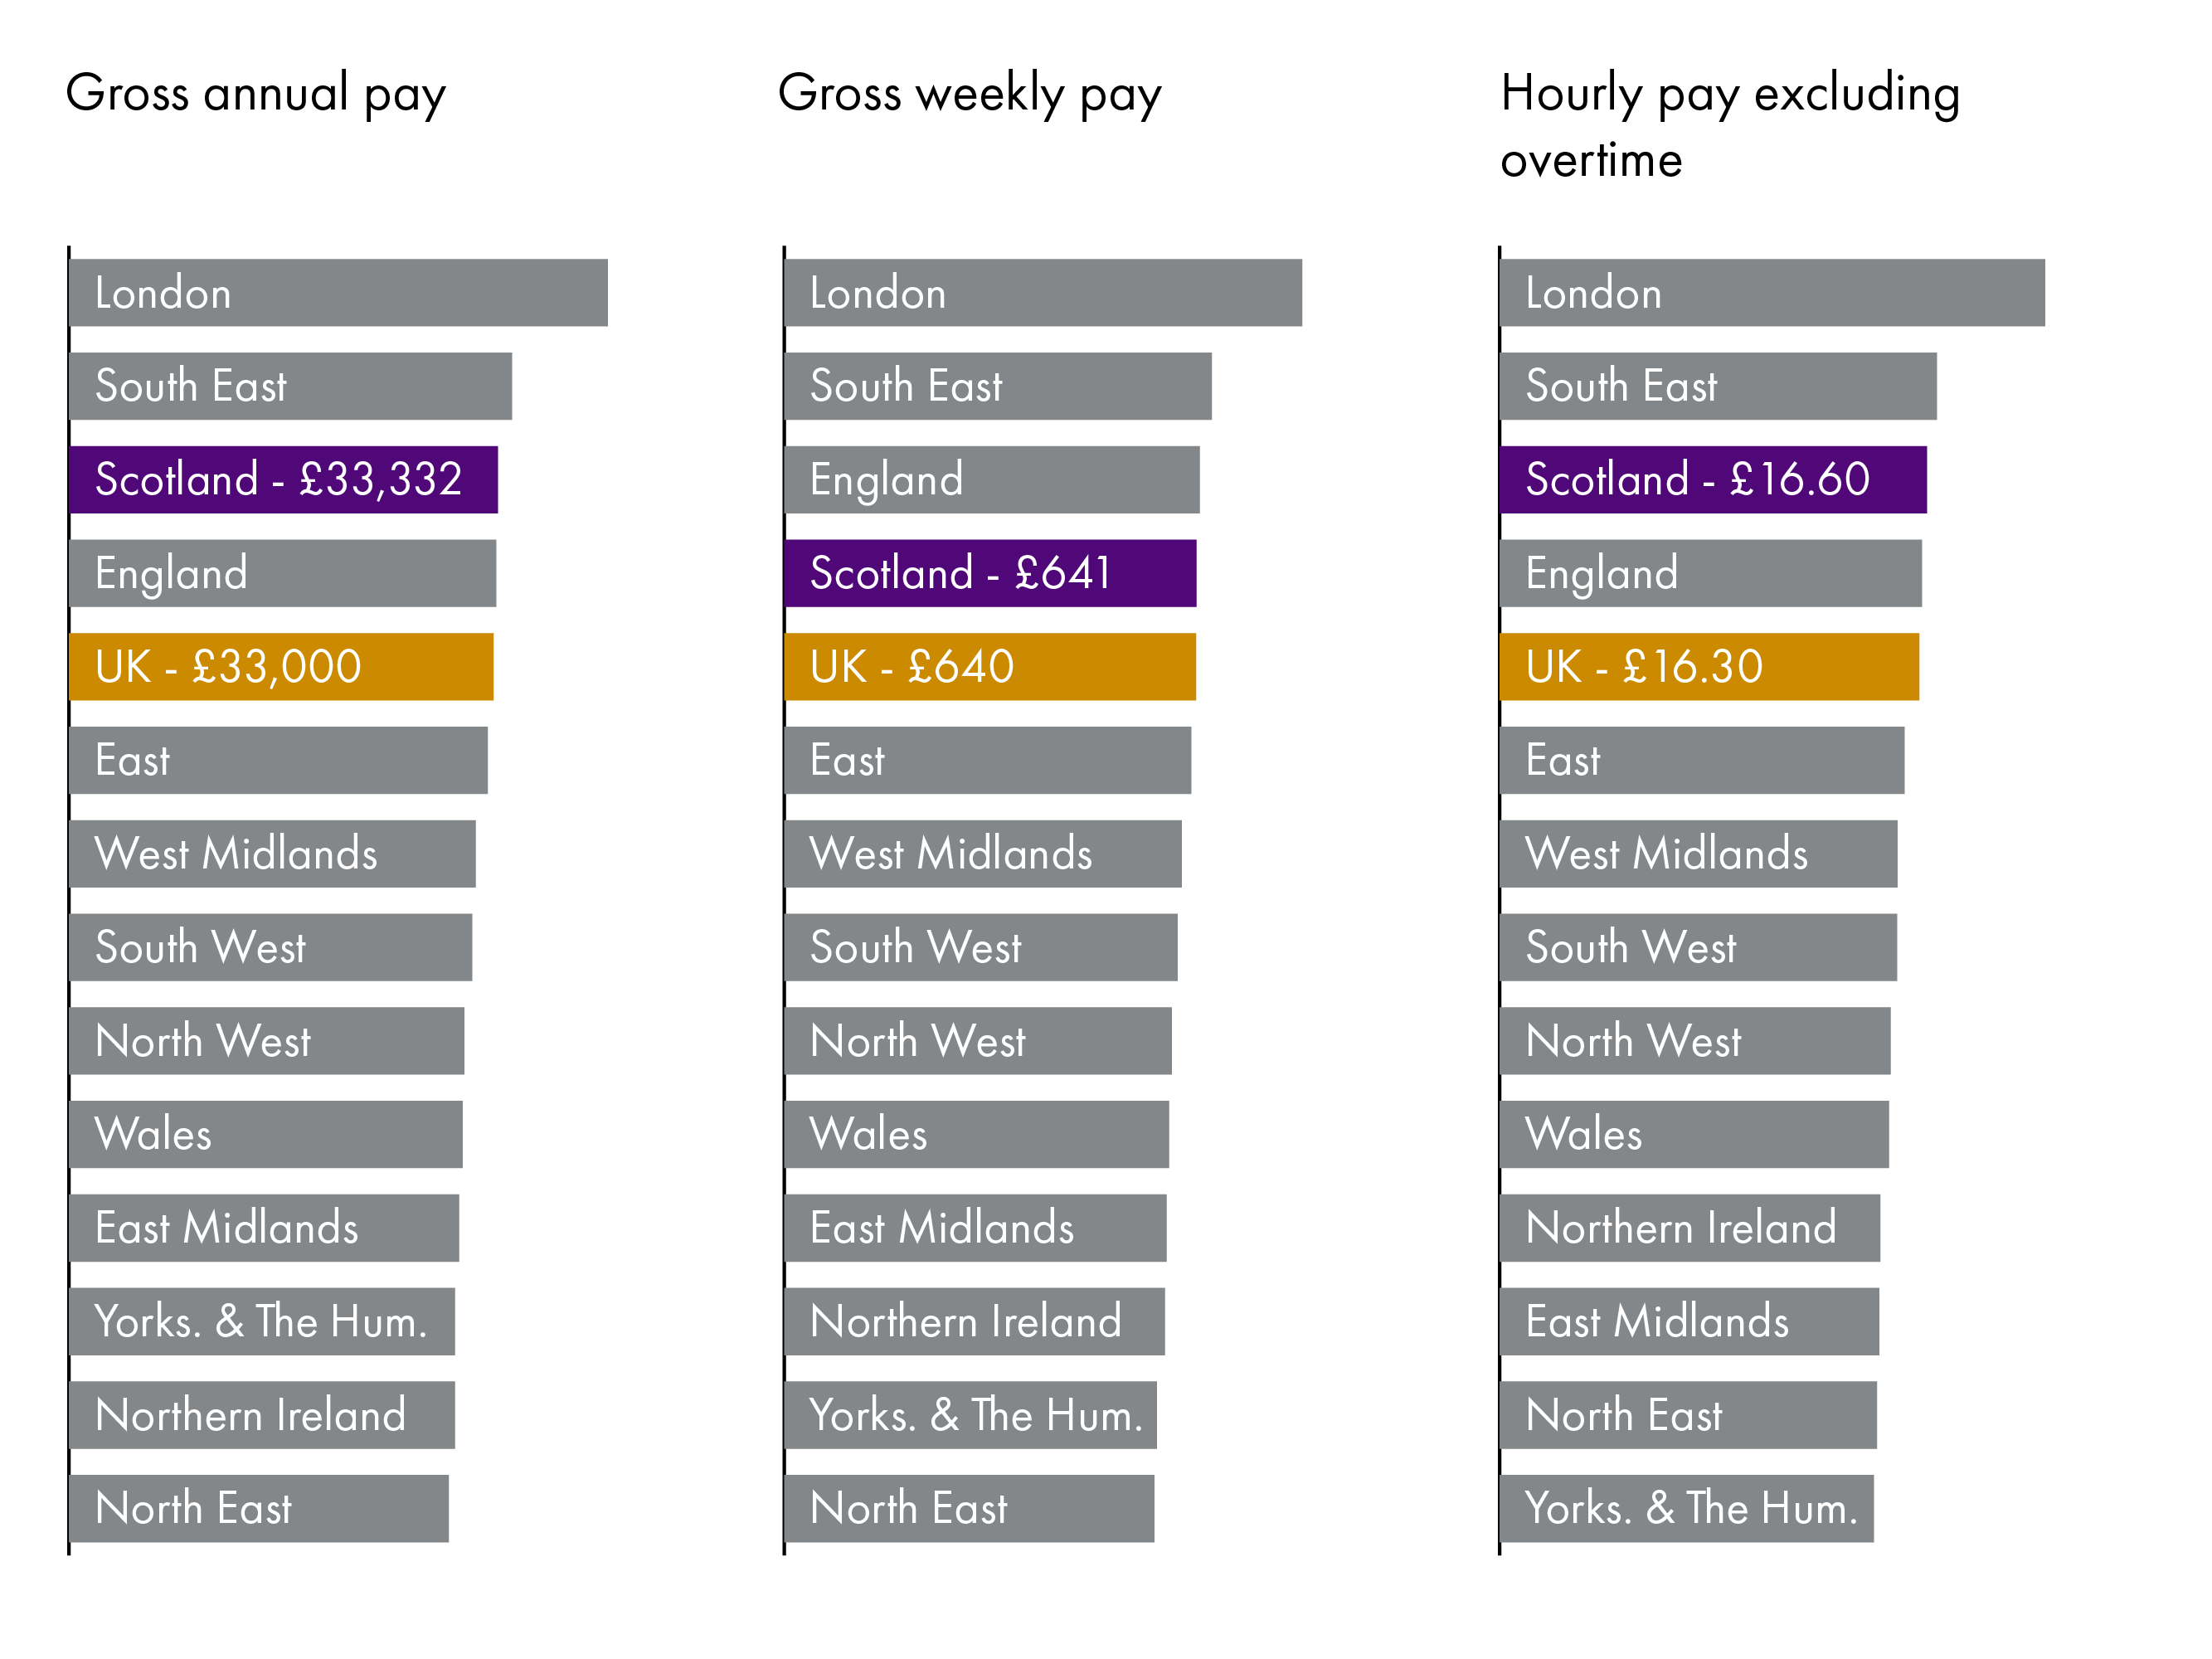 Three horizontal bar charts showing the value of pay for full-time employees by nation and region of the UK. One for gross annual pay, one for gross weekly pay and one for hourly pay excluding overtime. More detail can be found in the text below.